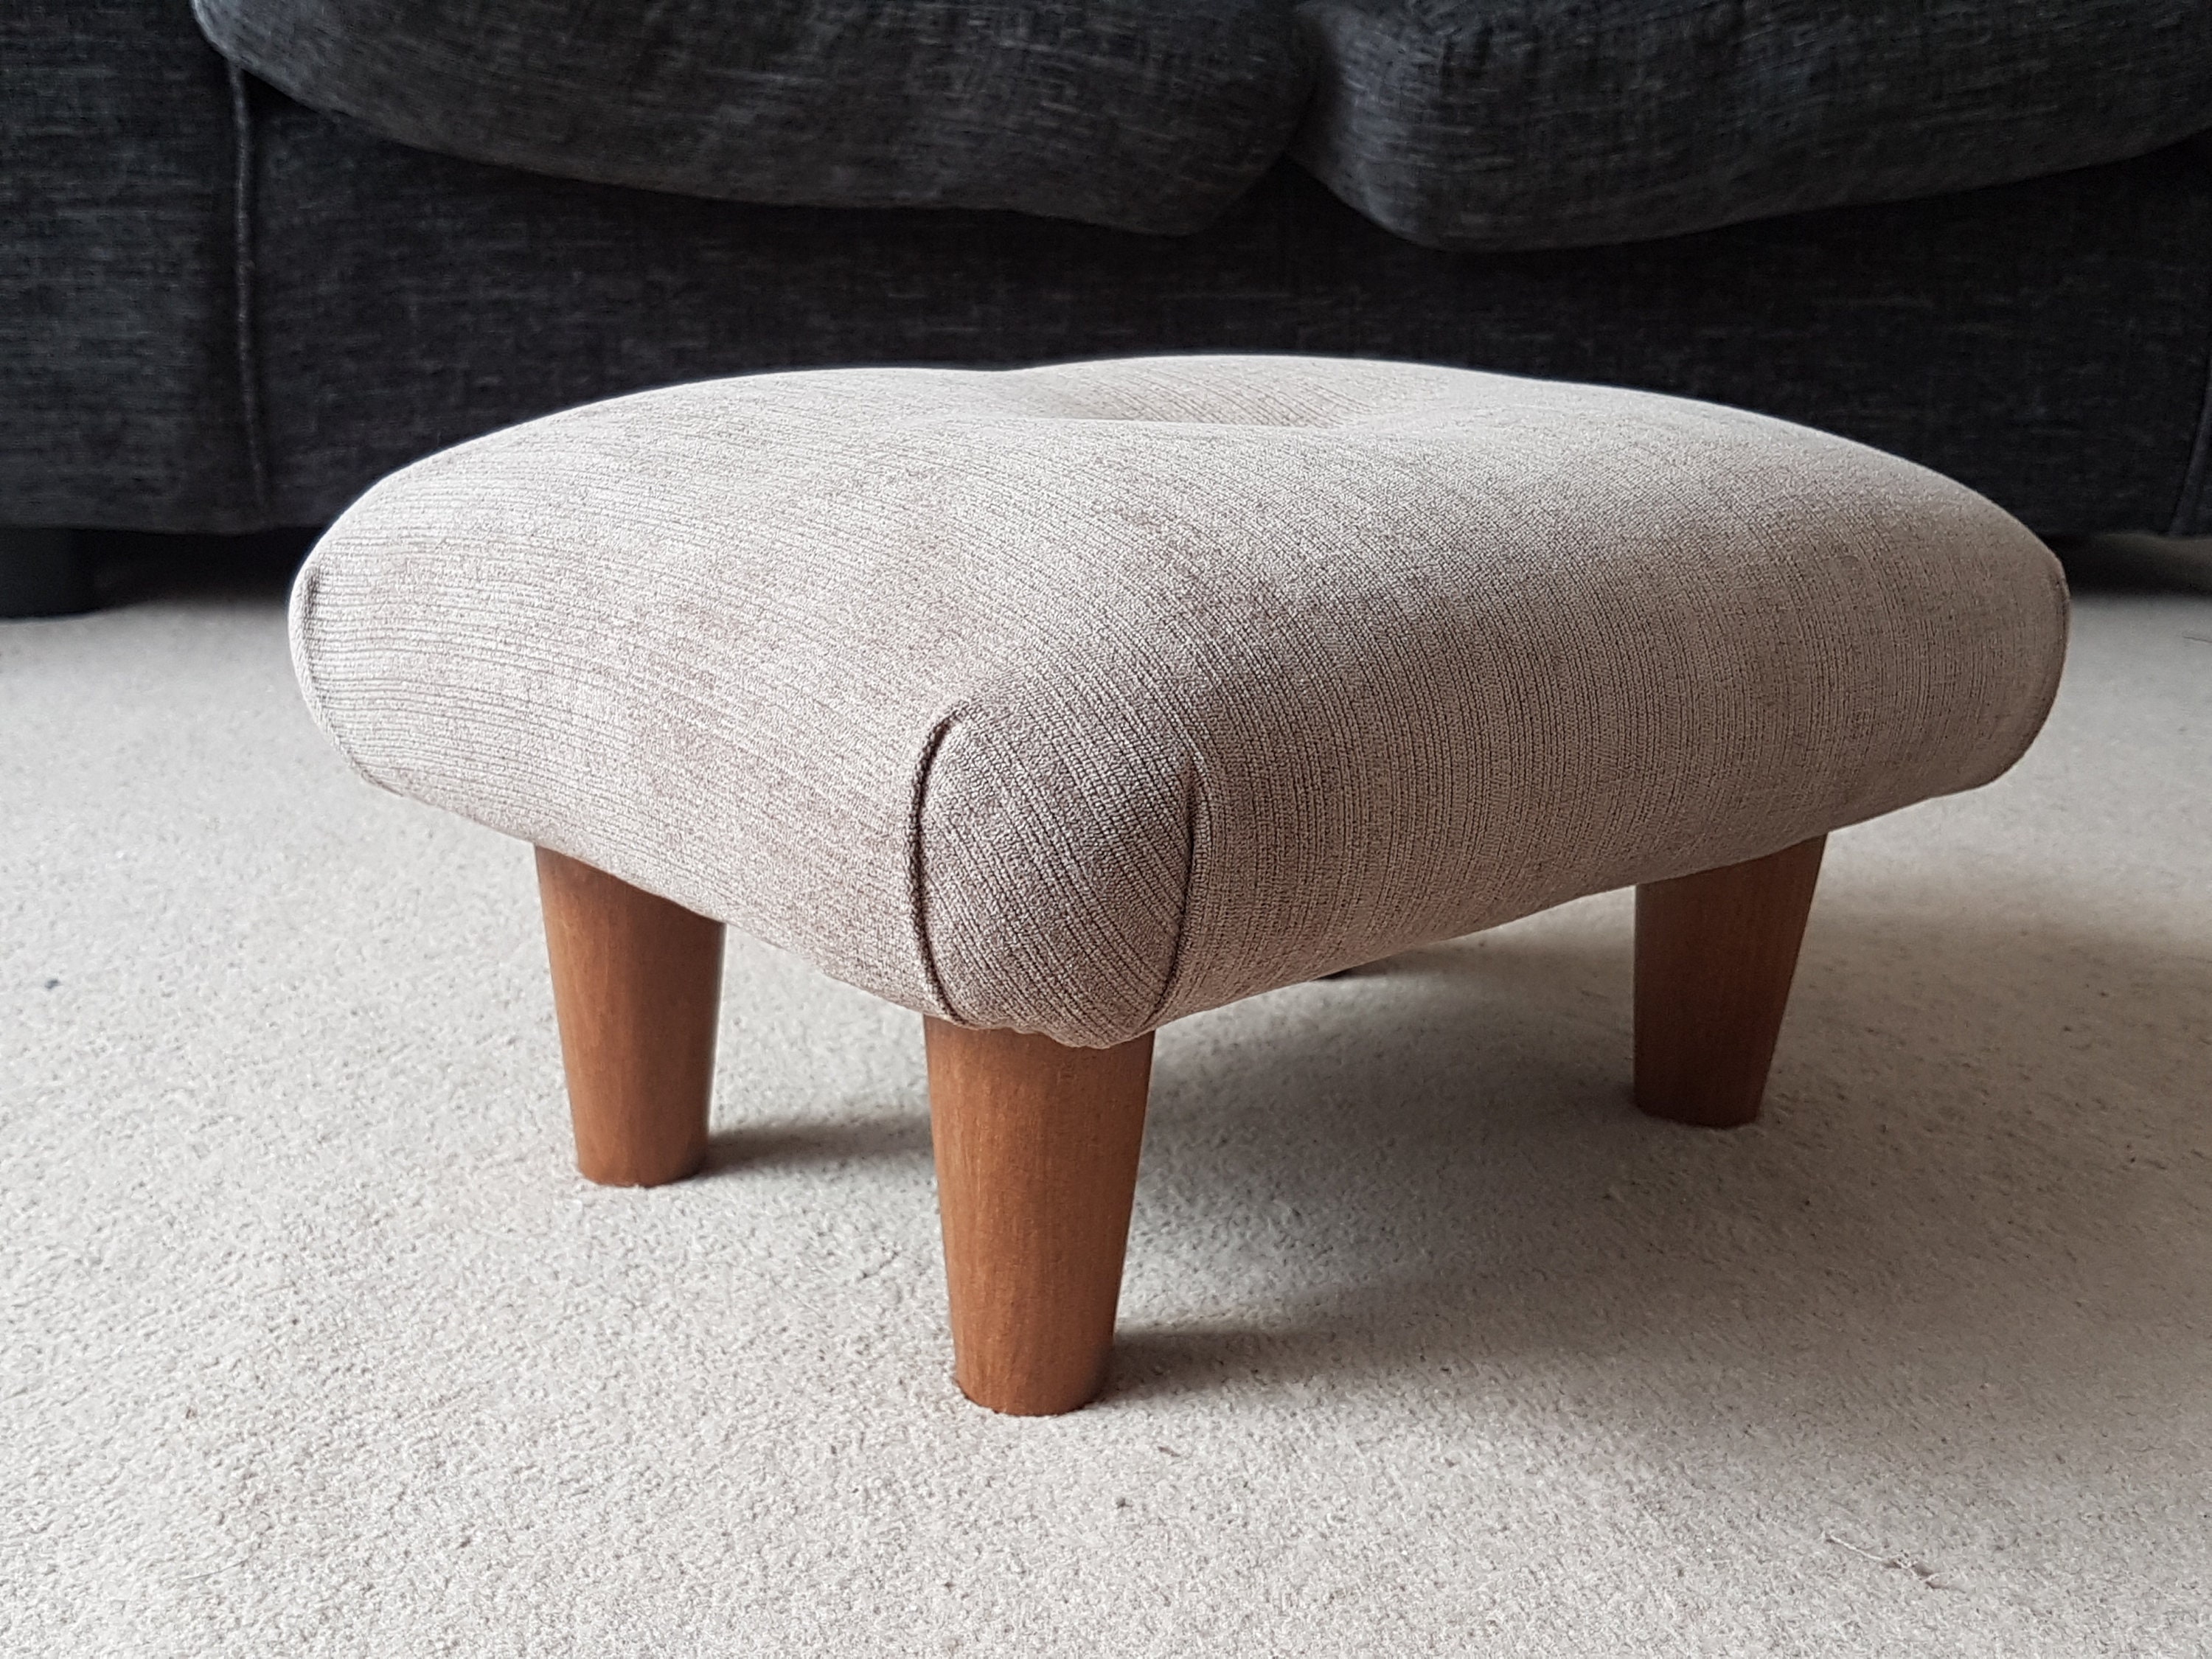 Satin Floral Small Footstool With Wooden Feet / Upholstered Handmade Stool  Bed Step Footrest Mum Dad Gift Home Office Under Chair Foot Stool 